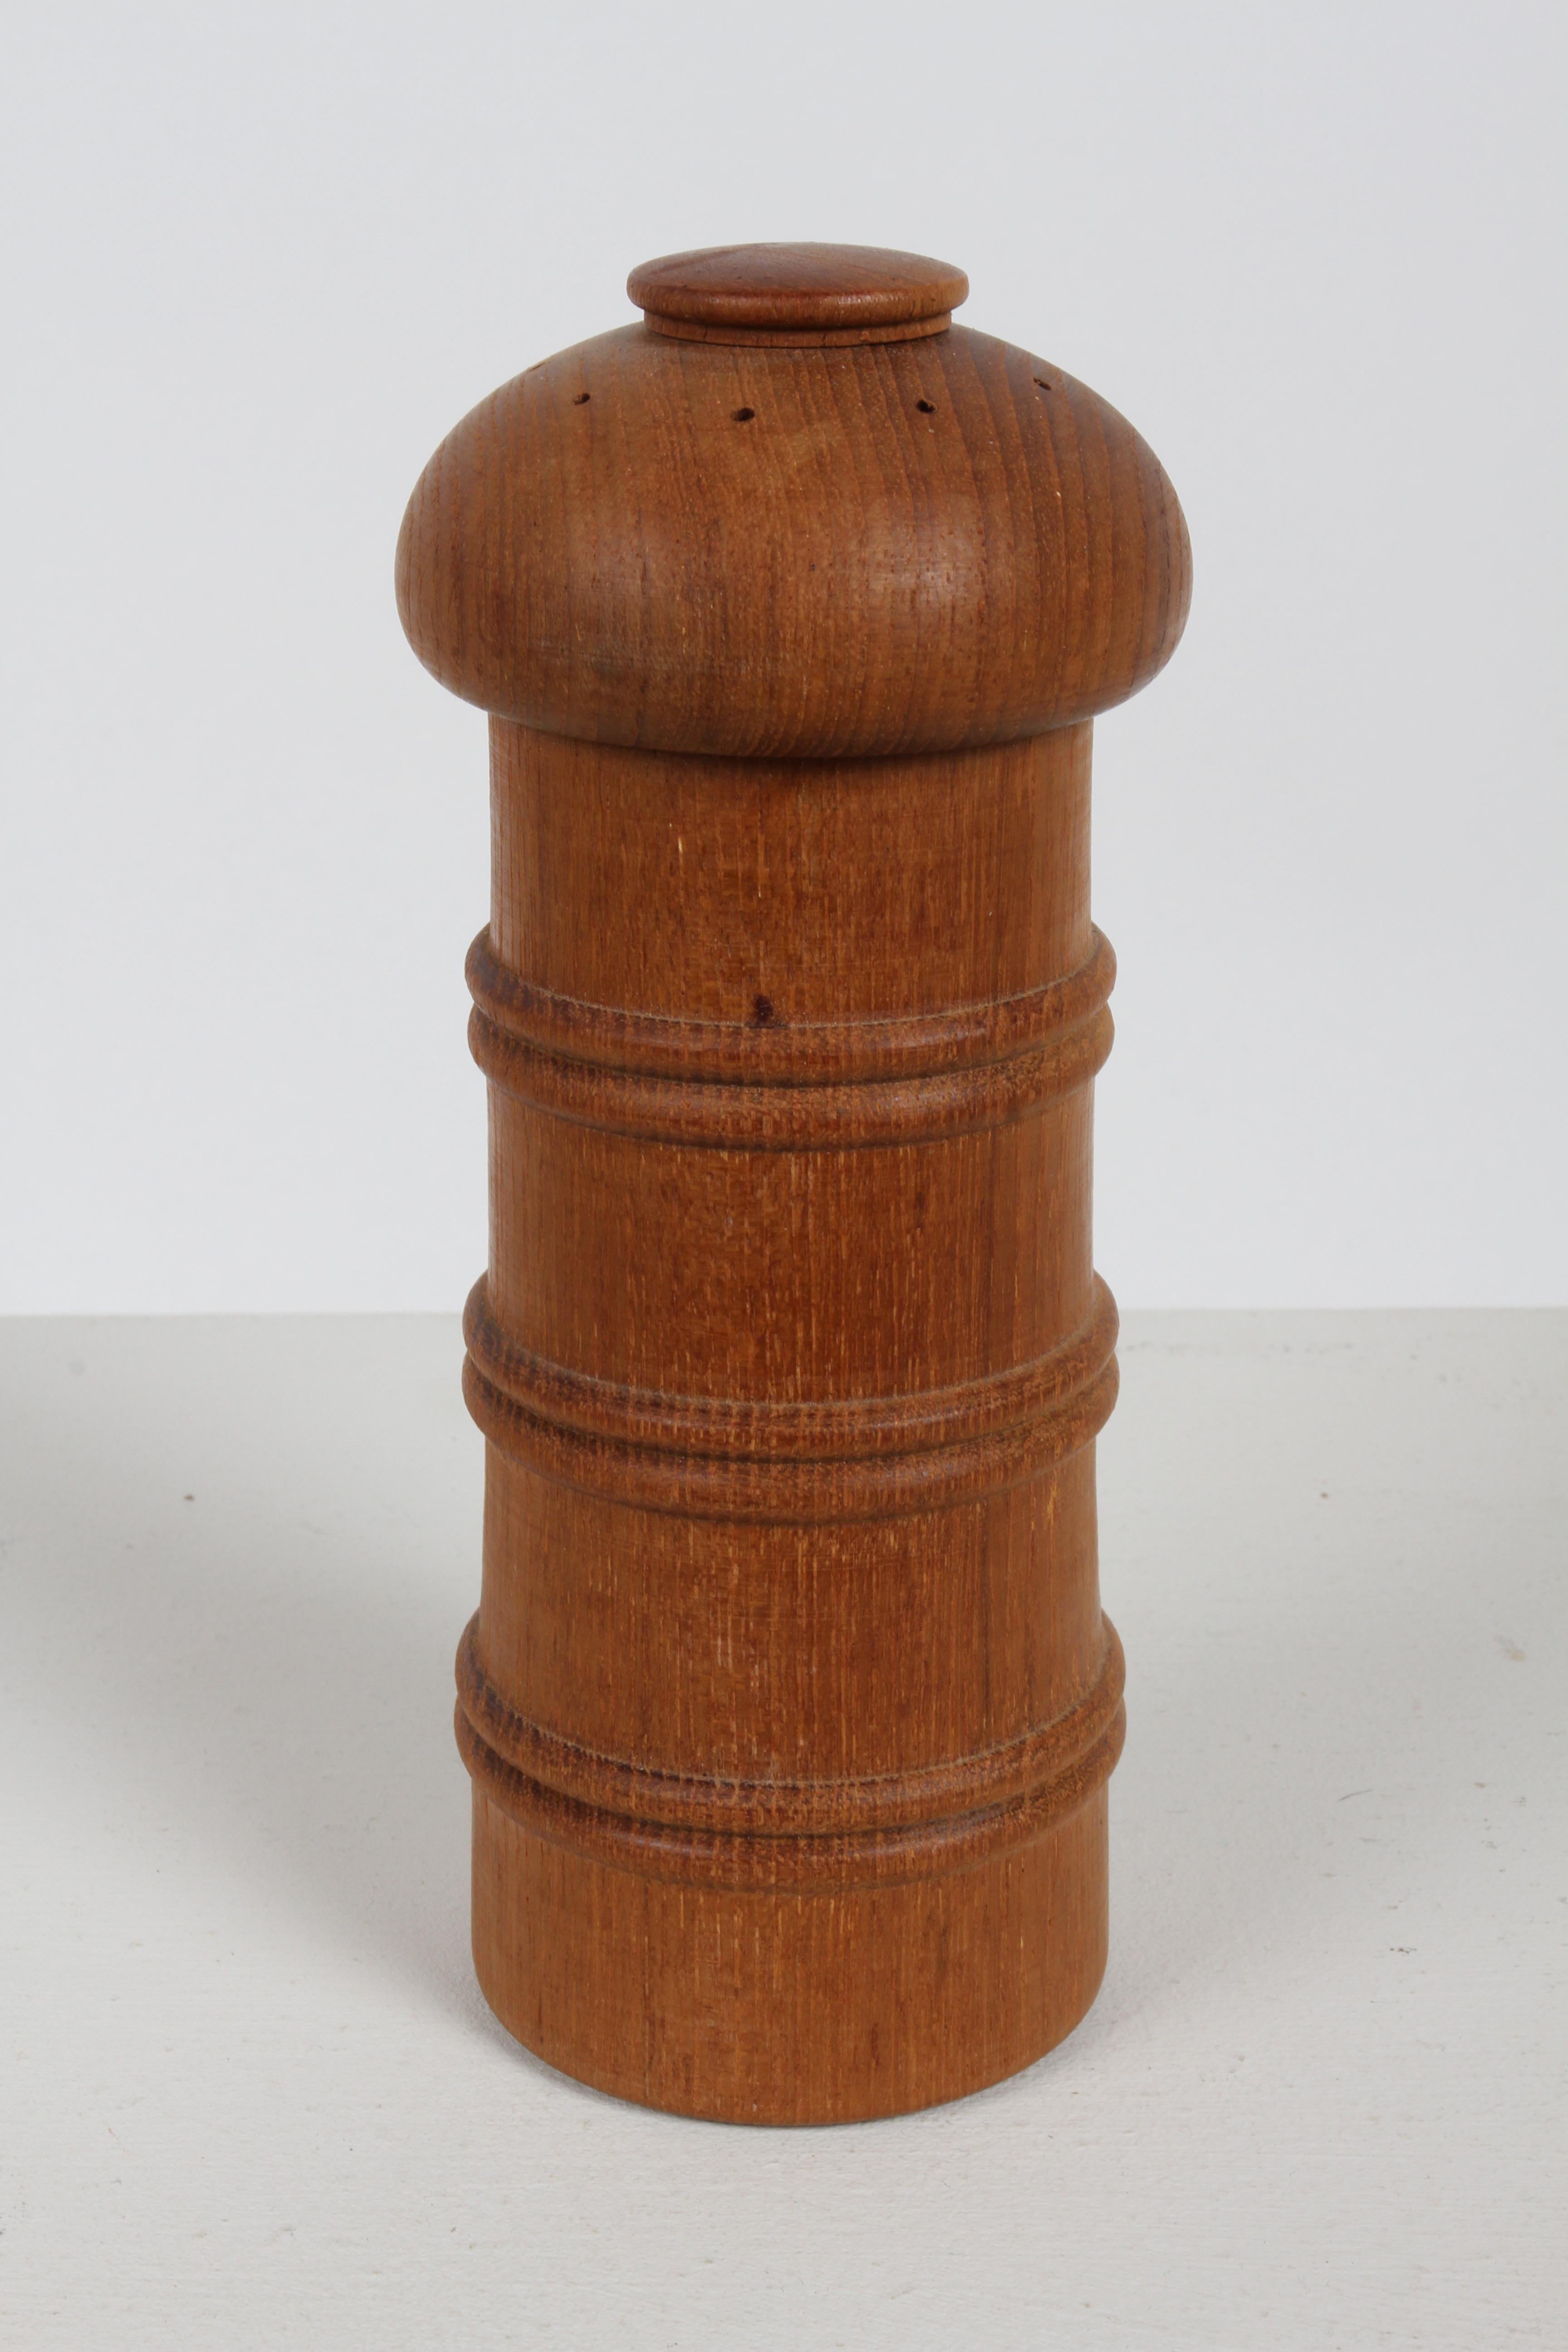 A 1970s Danish Modern Jens Quistgaard Salt & peppermill made of teak, tall form with raised rings. Stamped Dansk Designs Ltd Denmark JHQ. Nice original condition. 

Ground pepper comes out of the bottom when top turns and salt sprinkles from top